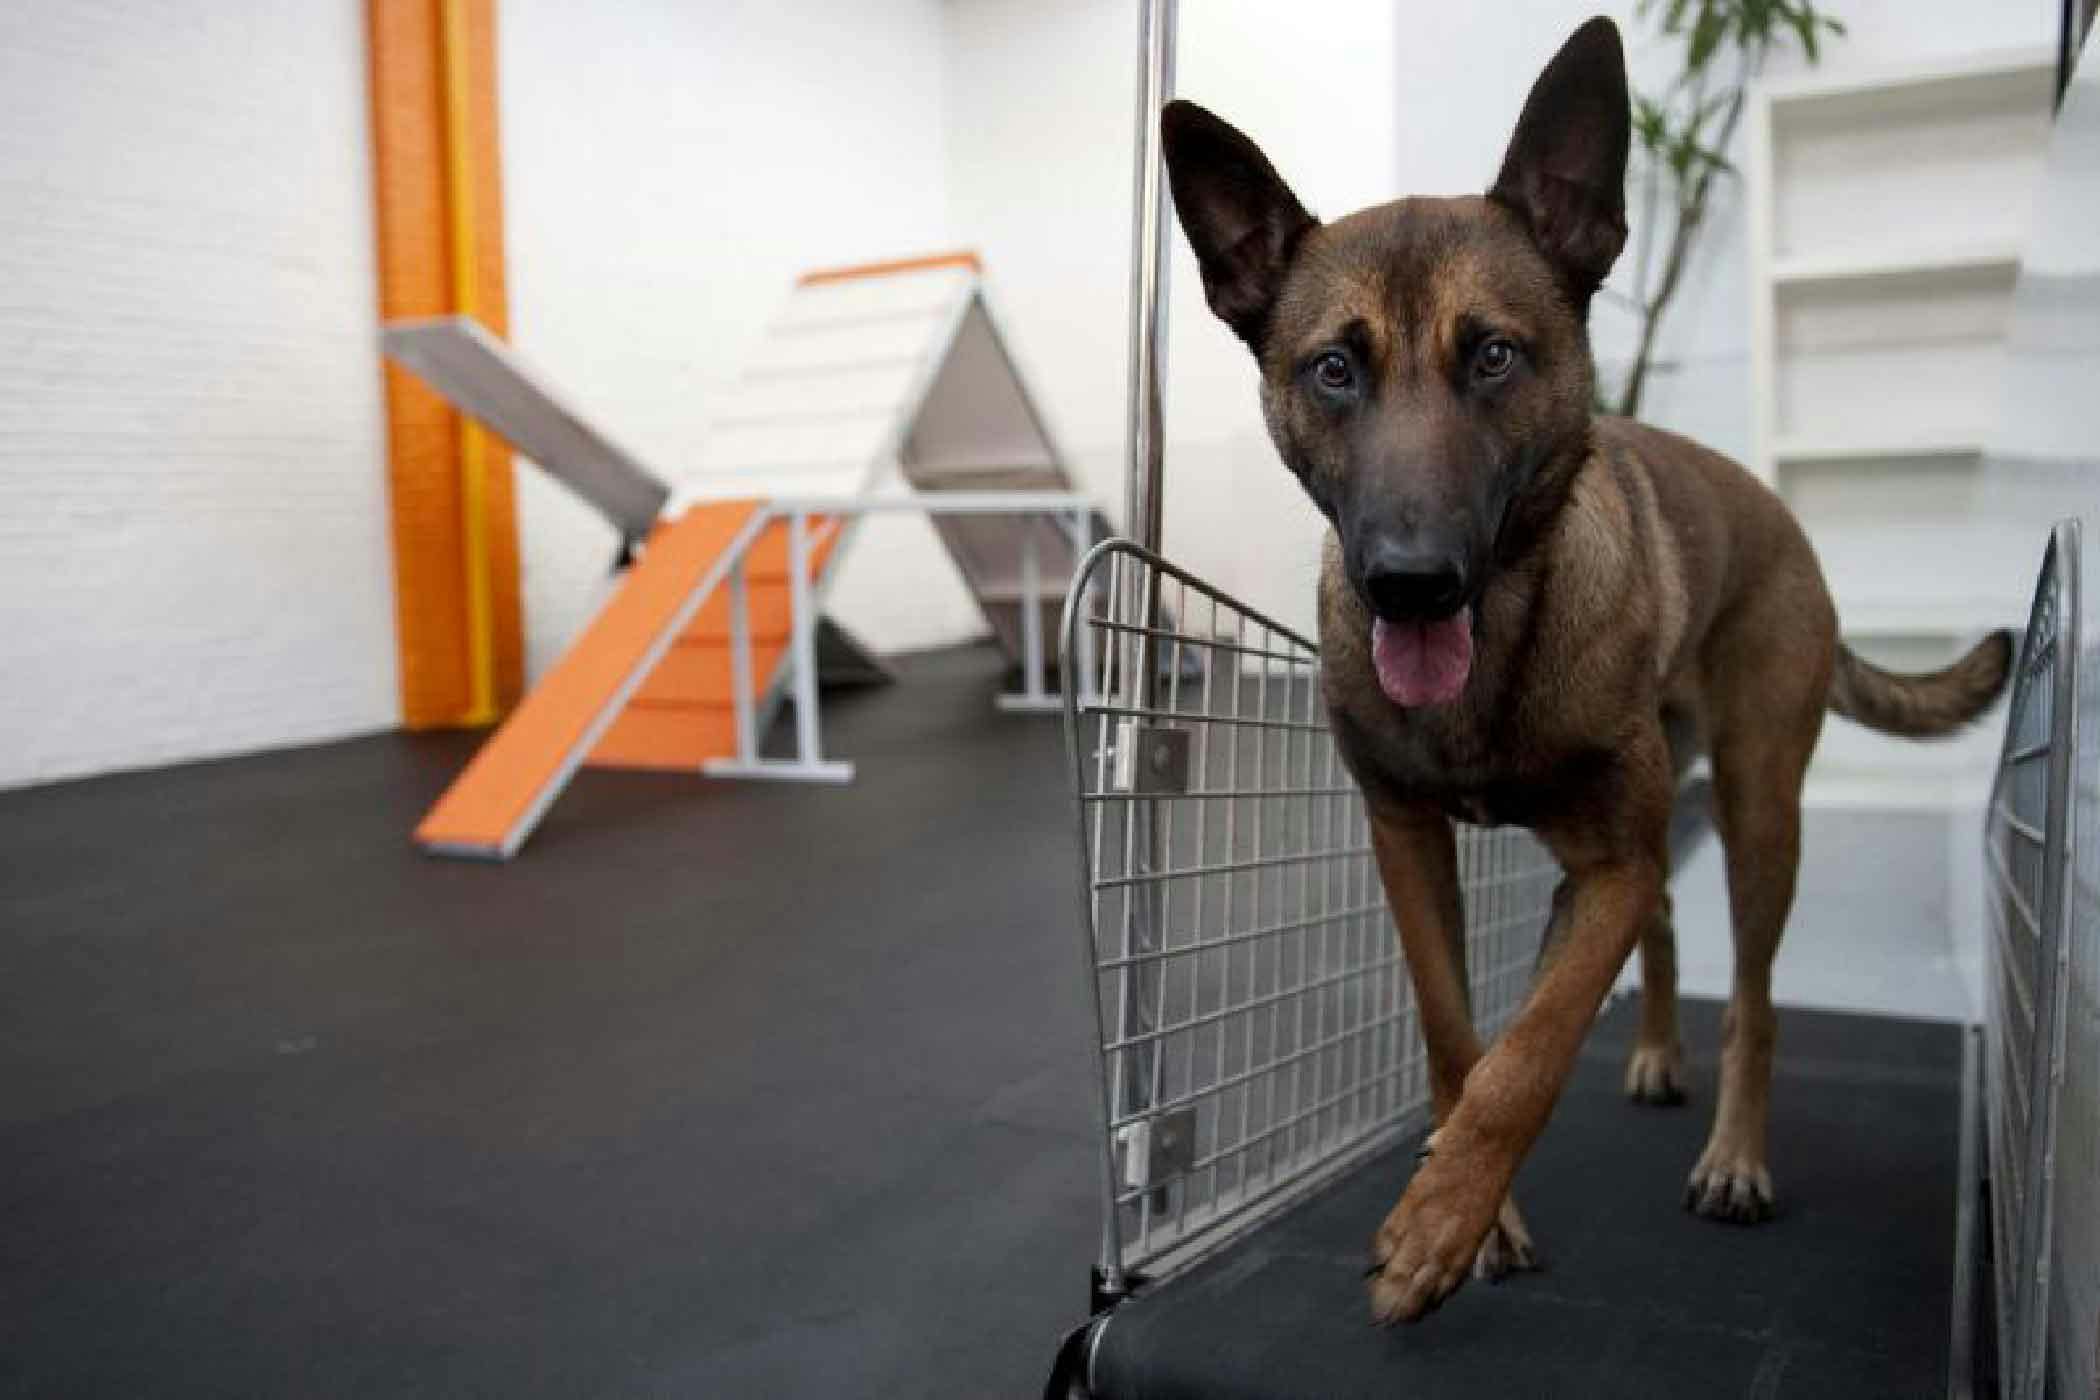 How to Train Your Dog to Use a Treadmill | Wag!